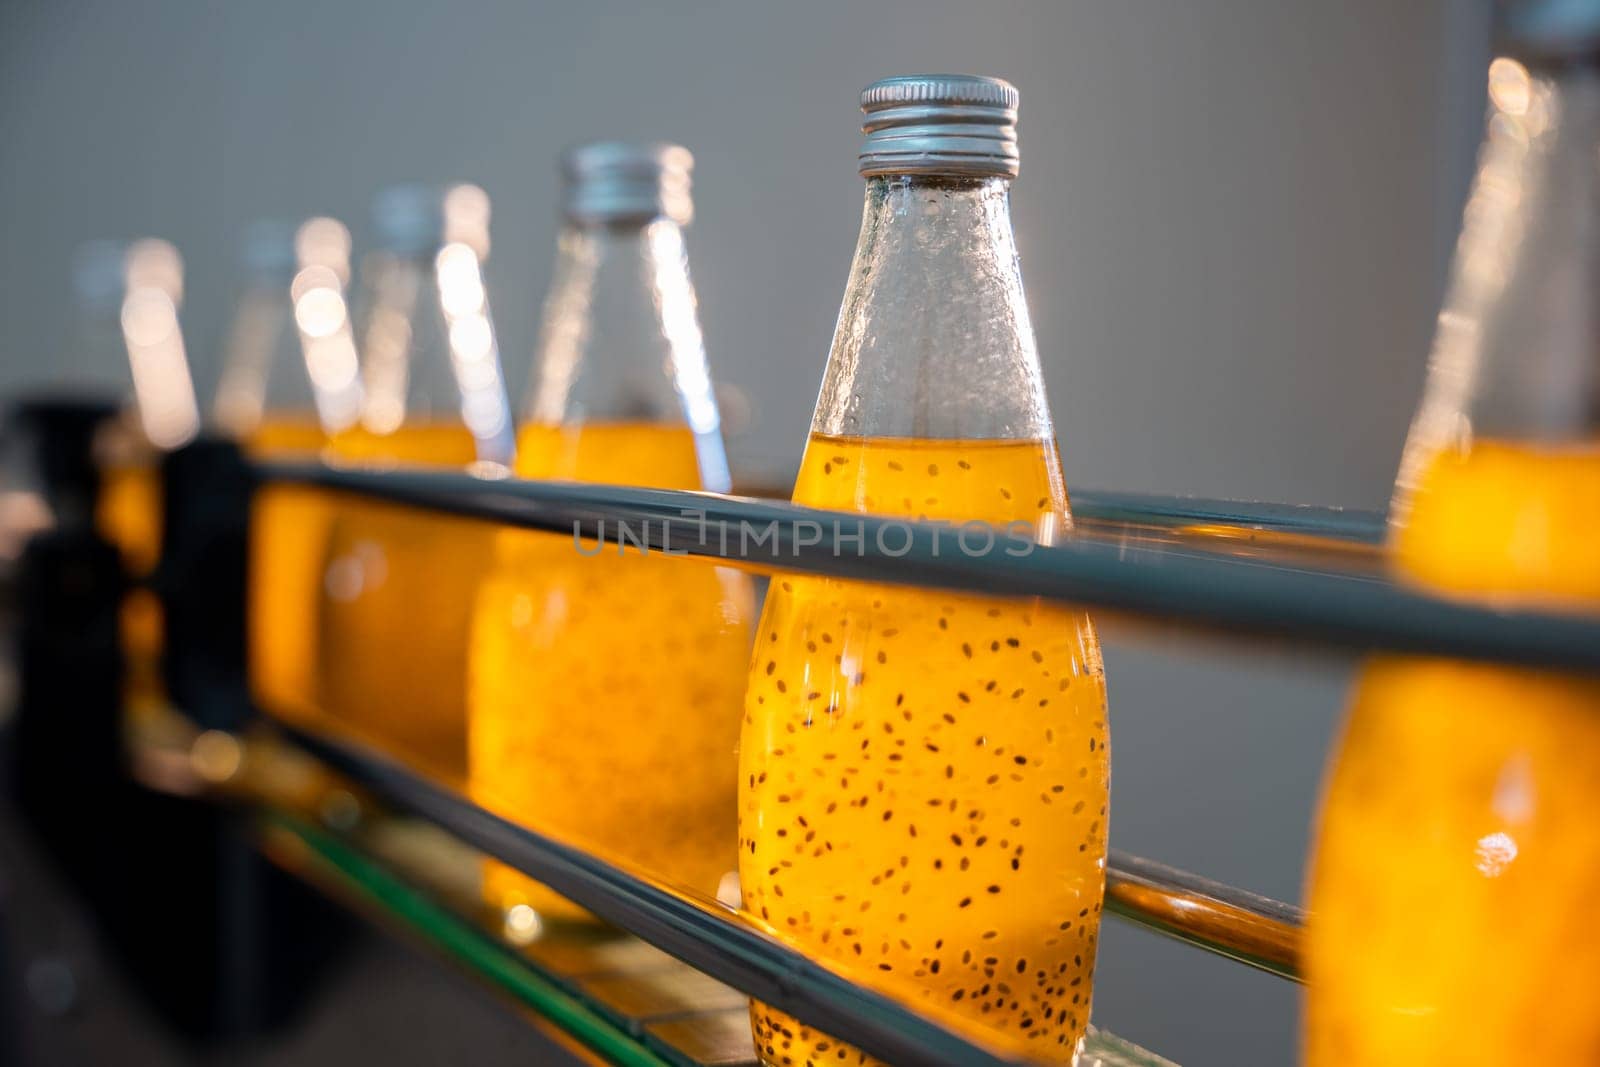 Quality manufacturing in the bottling factory is visible as transparent bottles are filled with basil or chia seed drinks infused with pomegranate. This automated process ensures a healthy outcome.